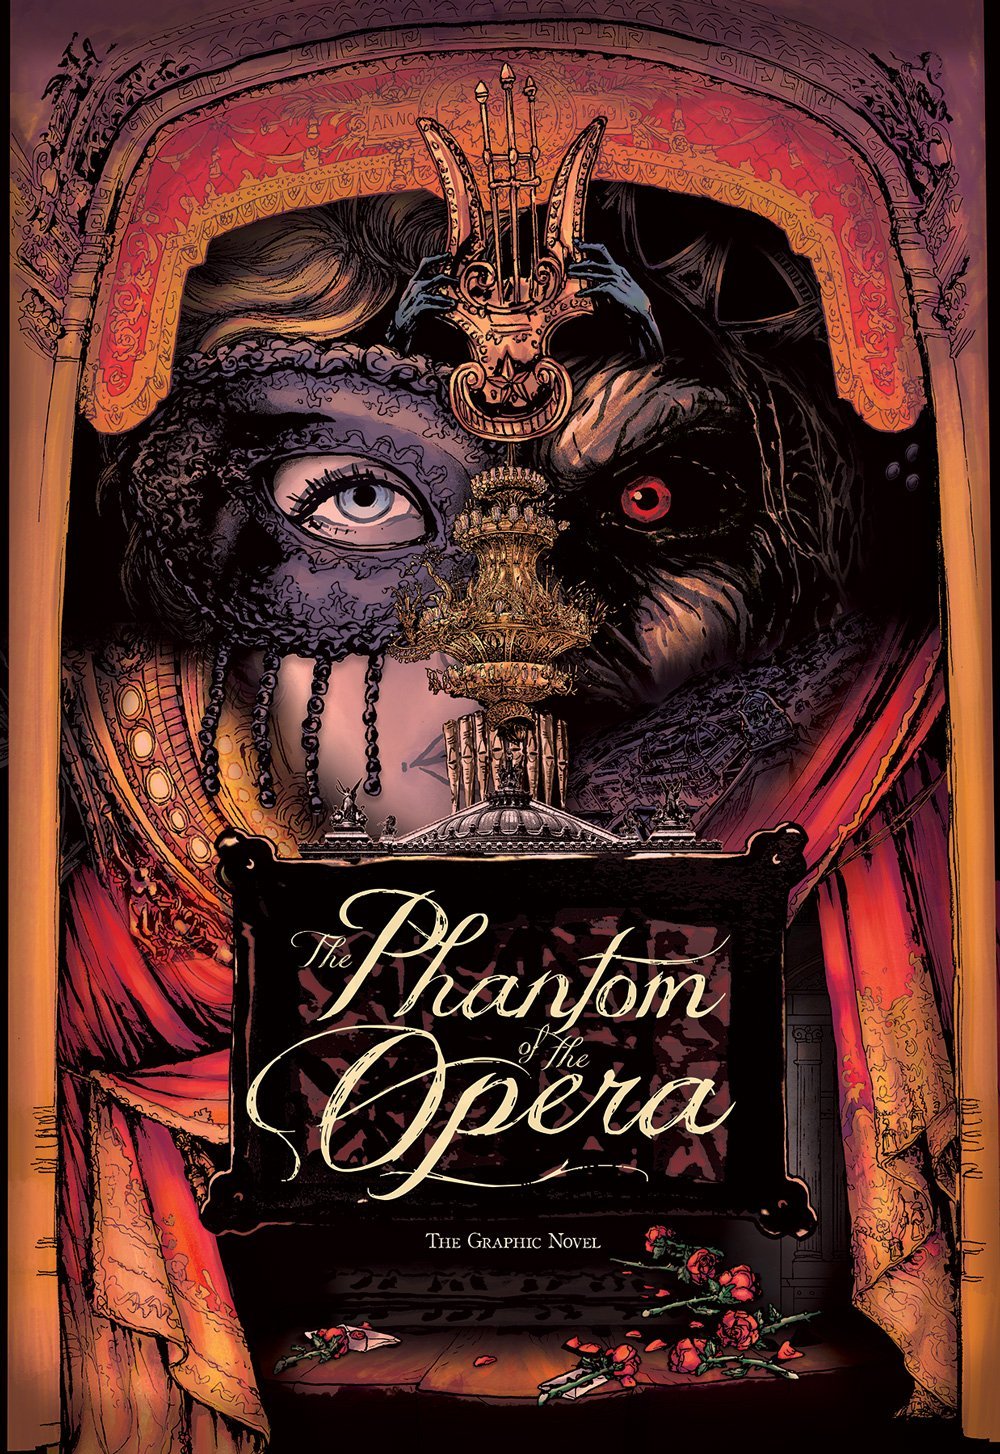 is the phantom of the opera book appropriate